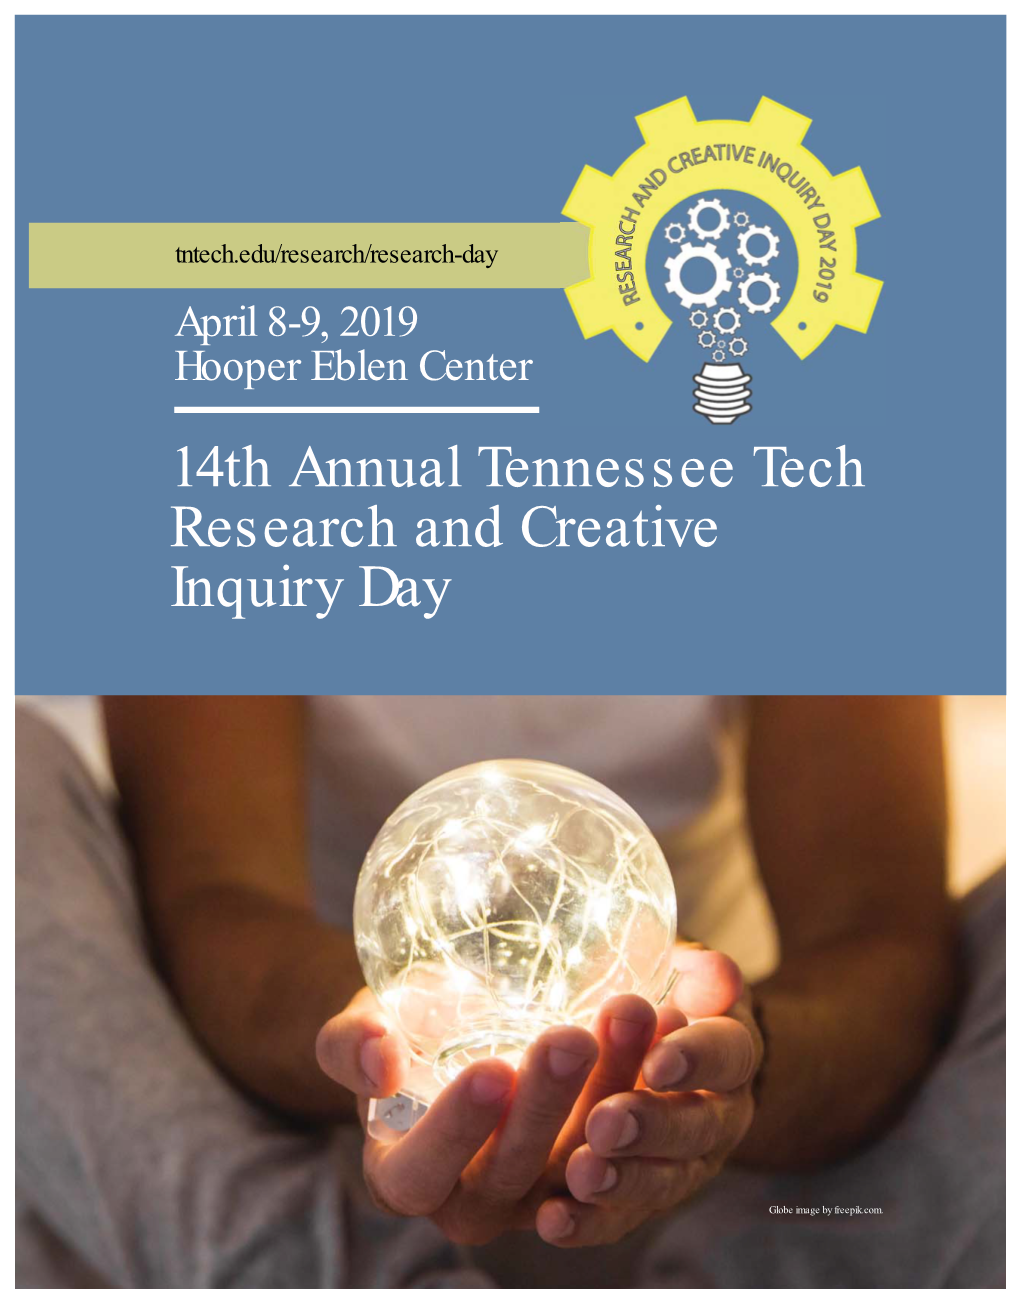 14Th Annual Tennessee Tech Research and Creative Inquiry Day